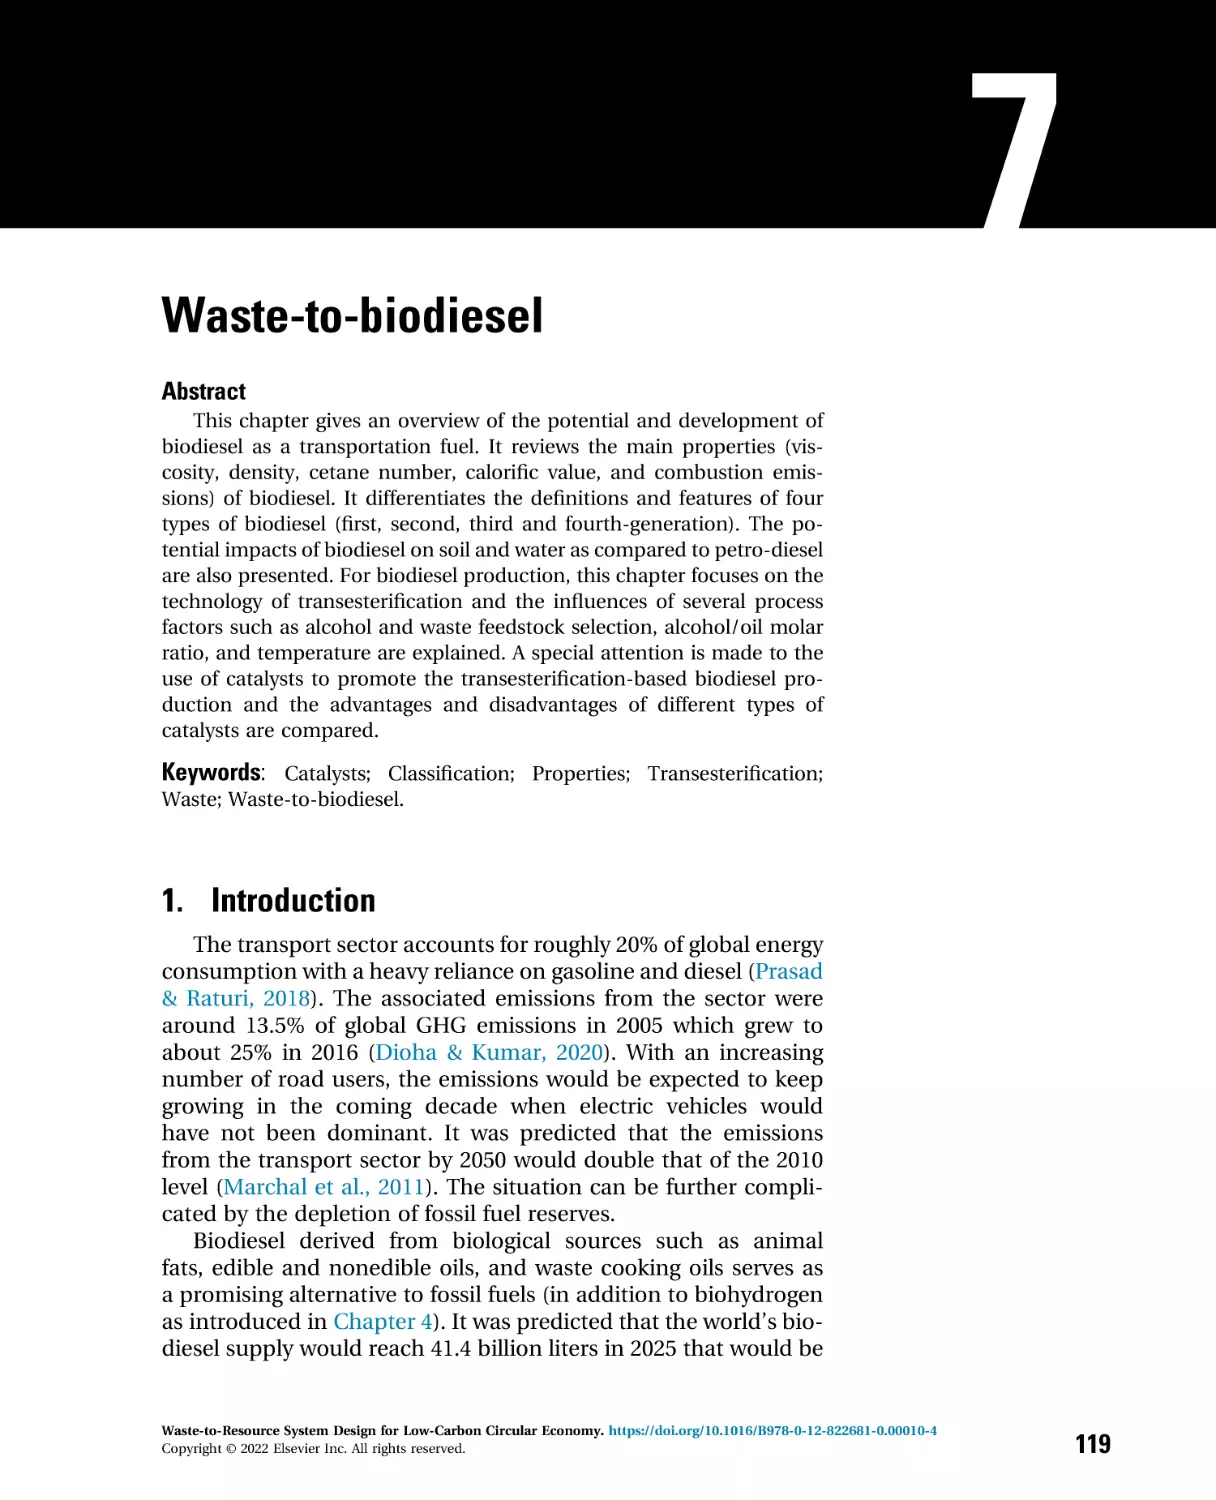 7 - Waste-to-biodiesel
1. Introduction